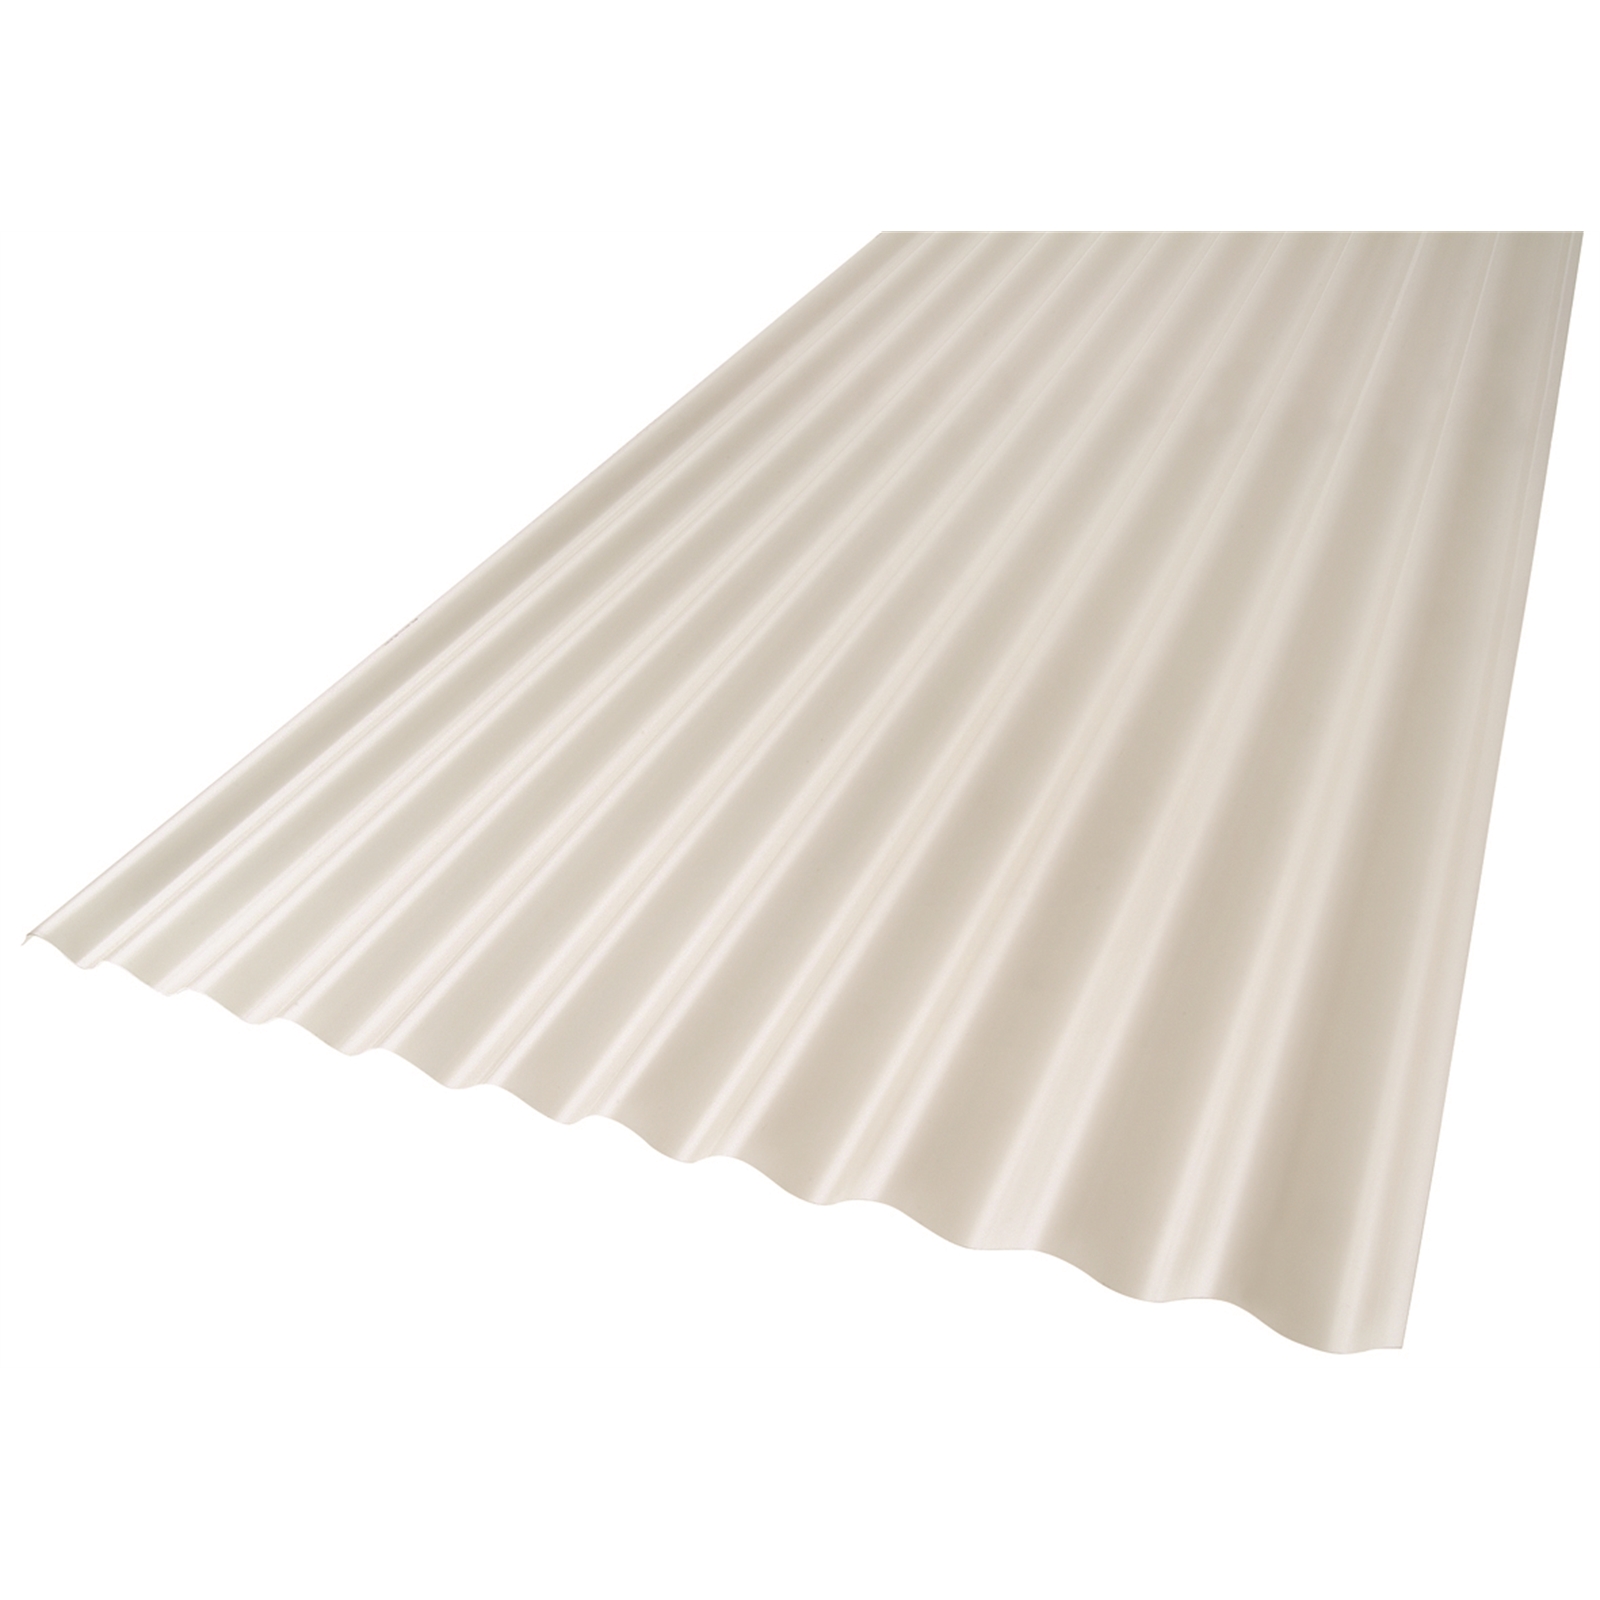 Suntuf Solarsmart 4.8m Diffused Ice Corrugated Polycarbonate Roofing